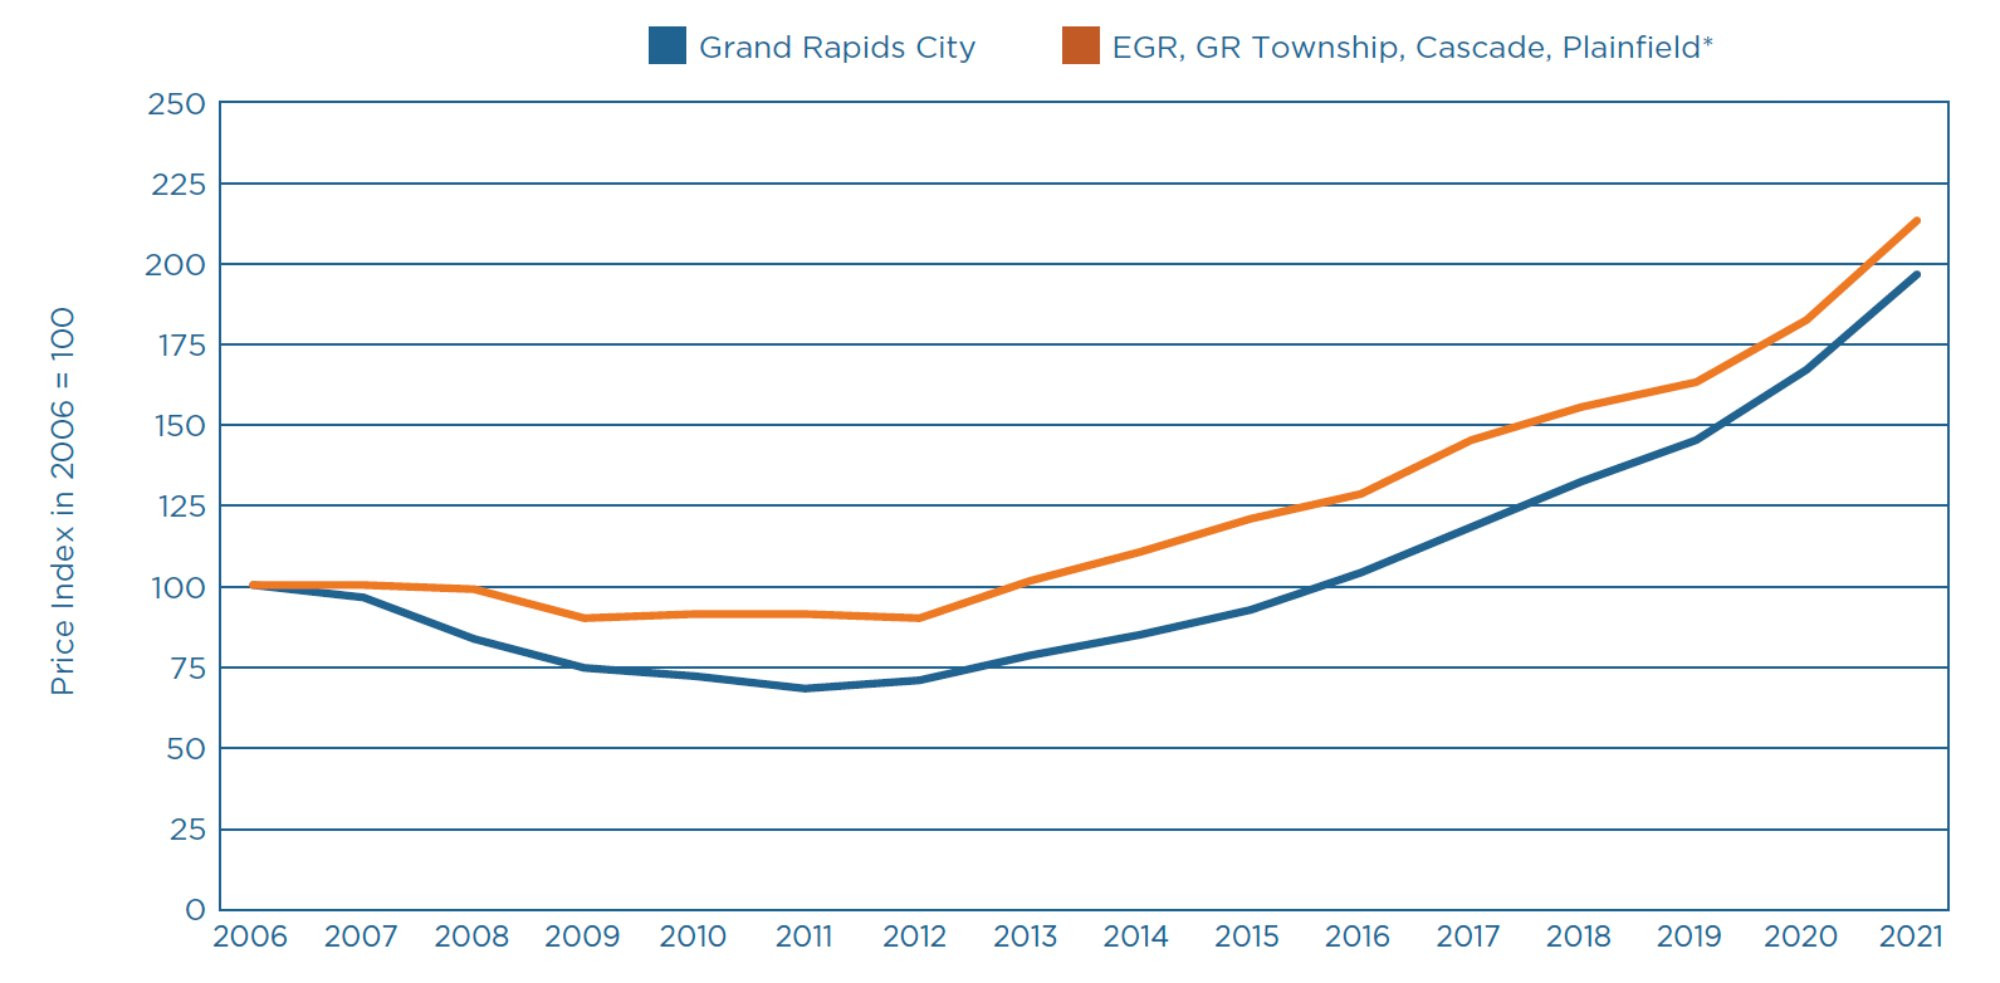 Figure of Housing Price Indexes (HPI) for the Grand Rapids Area